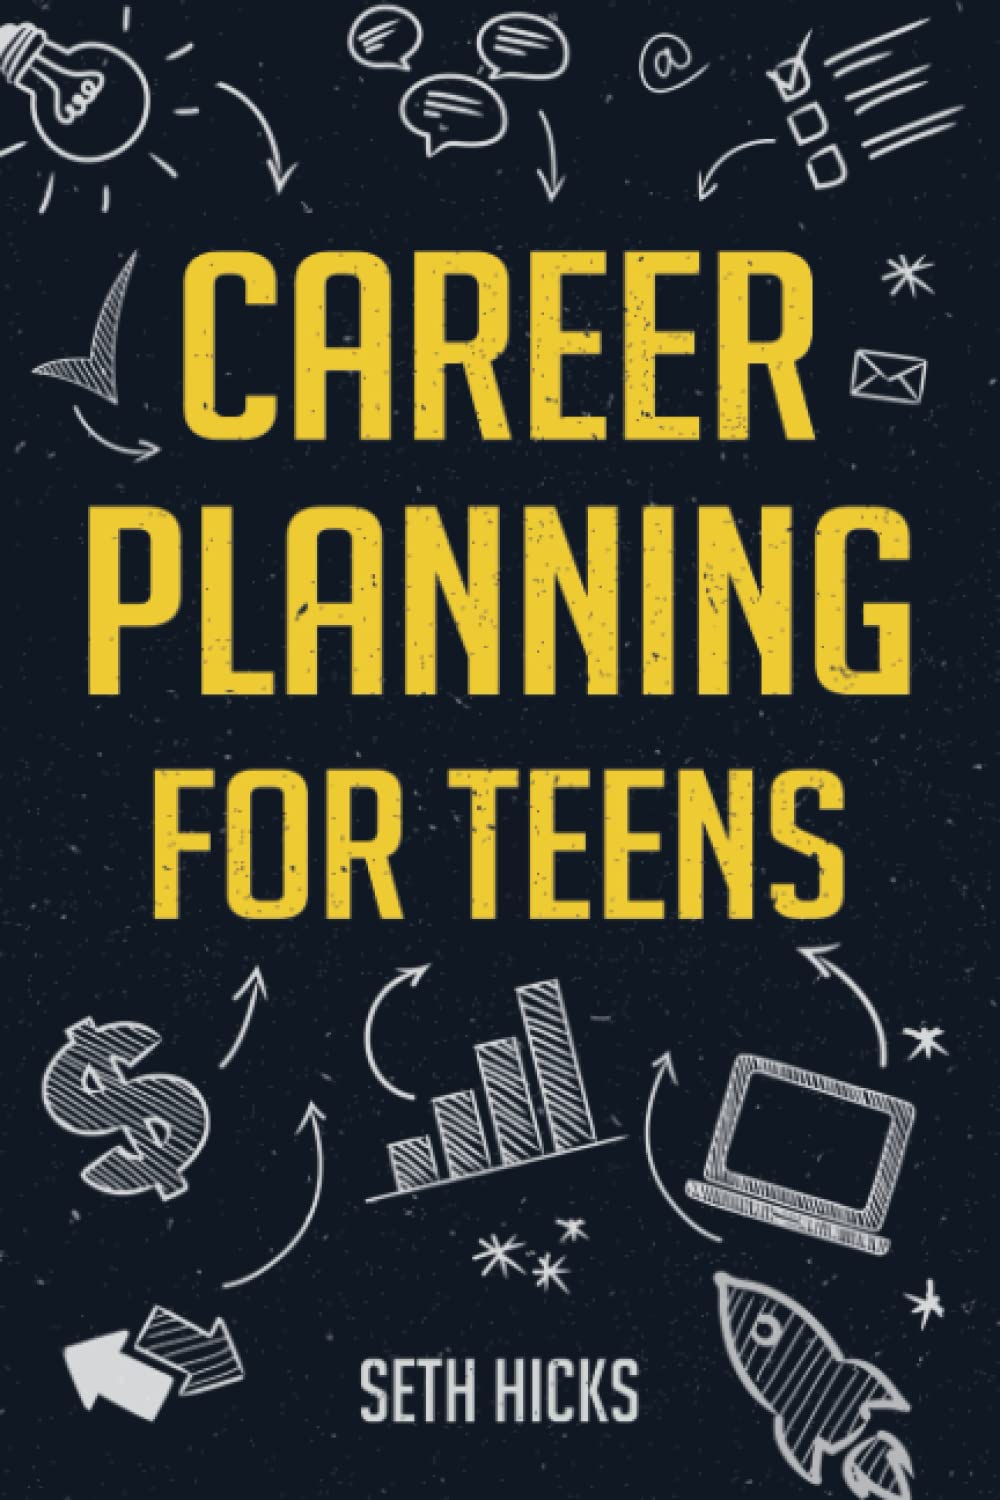 Career Planning for Teens: Discover The Proven Path to Finding a Successful Career That's Right for You!